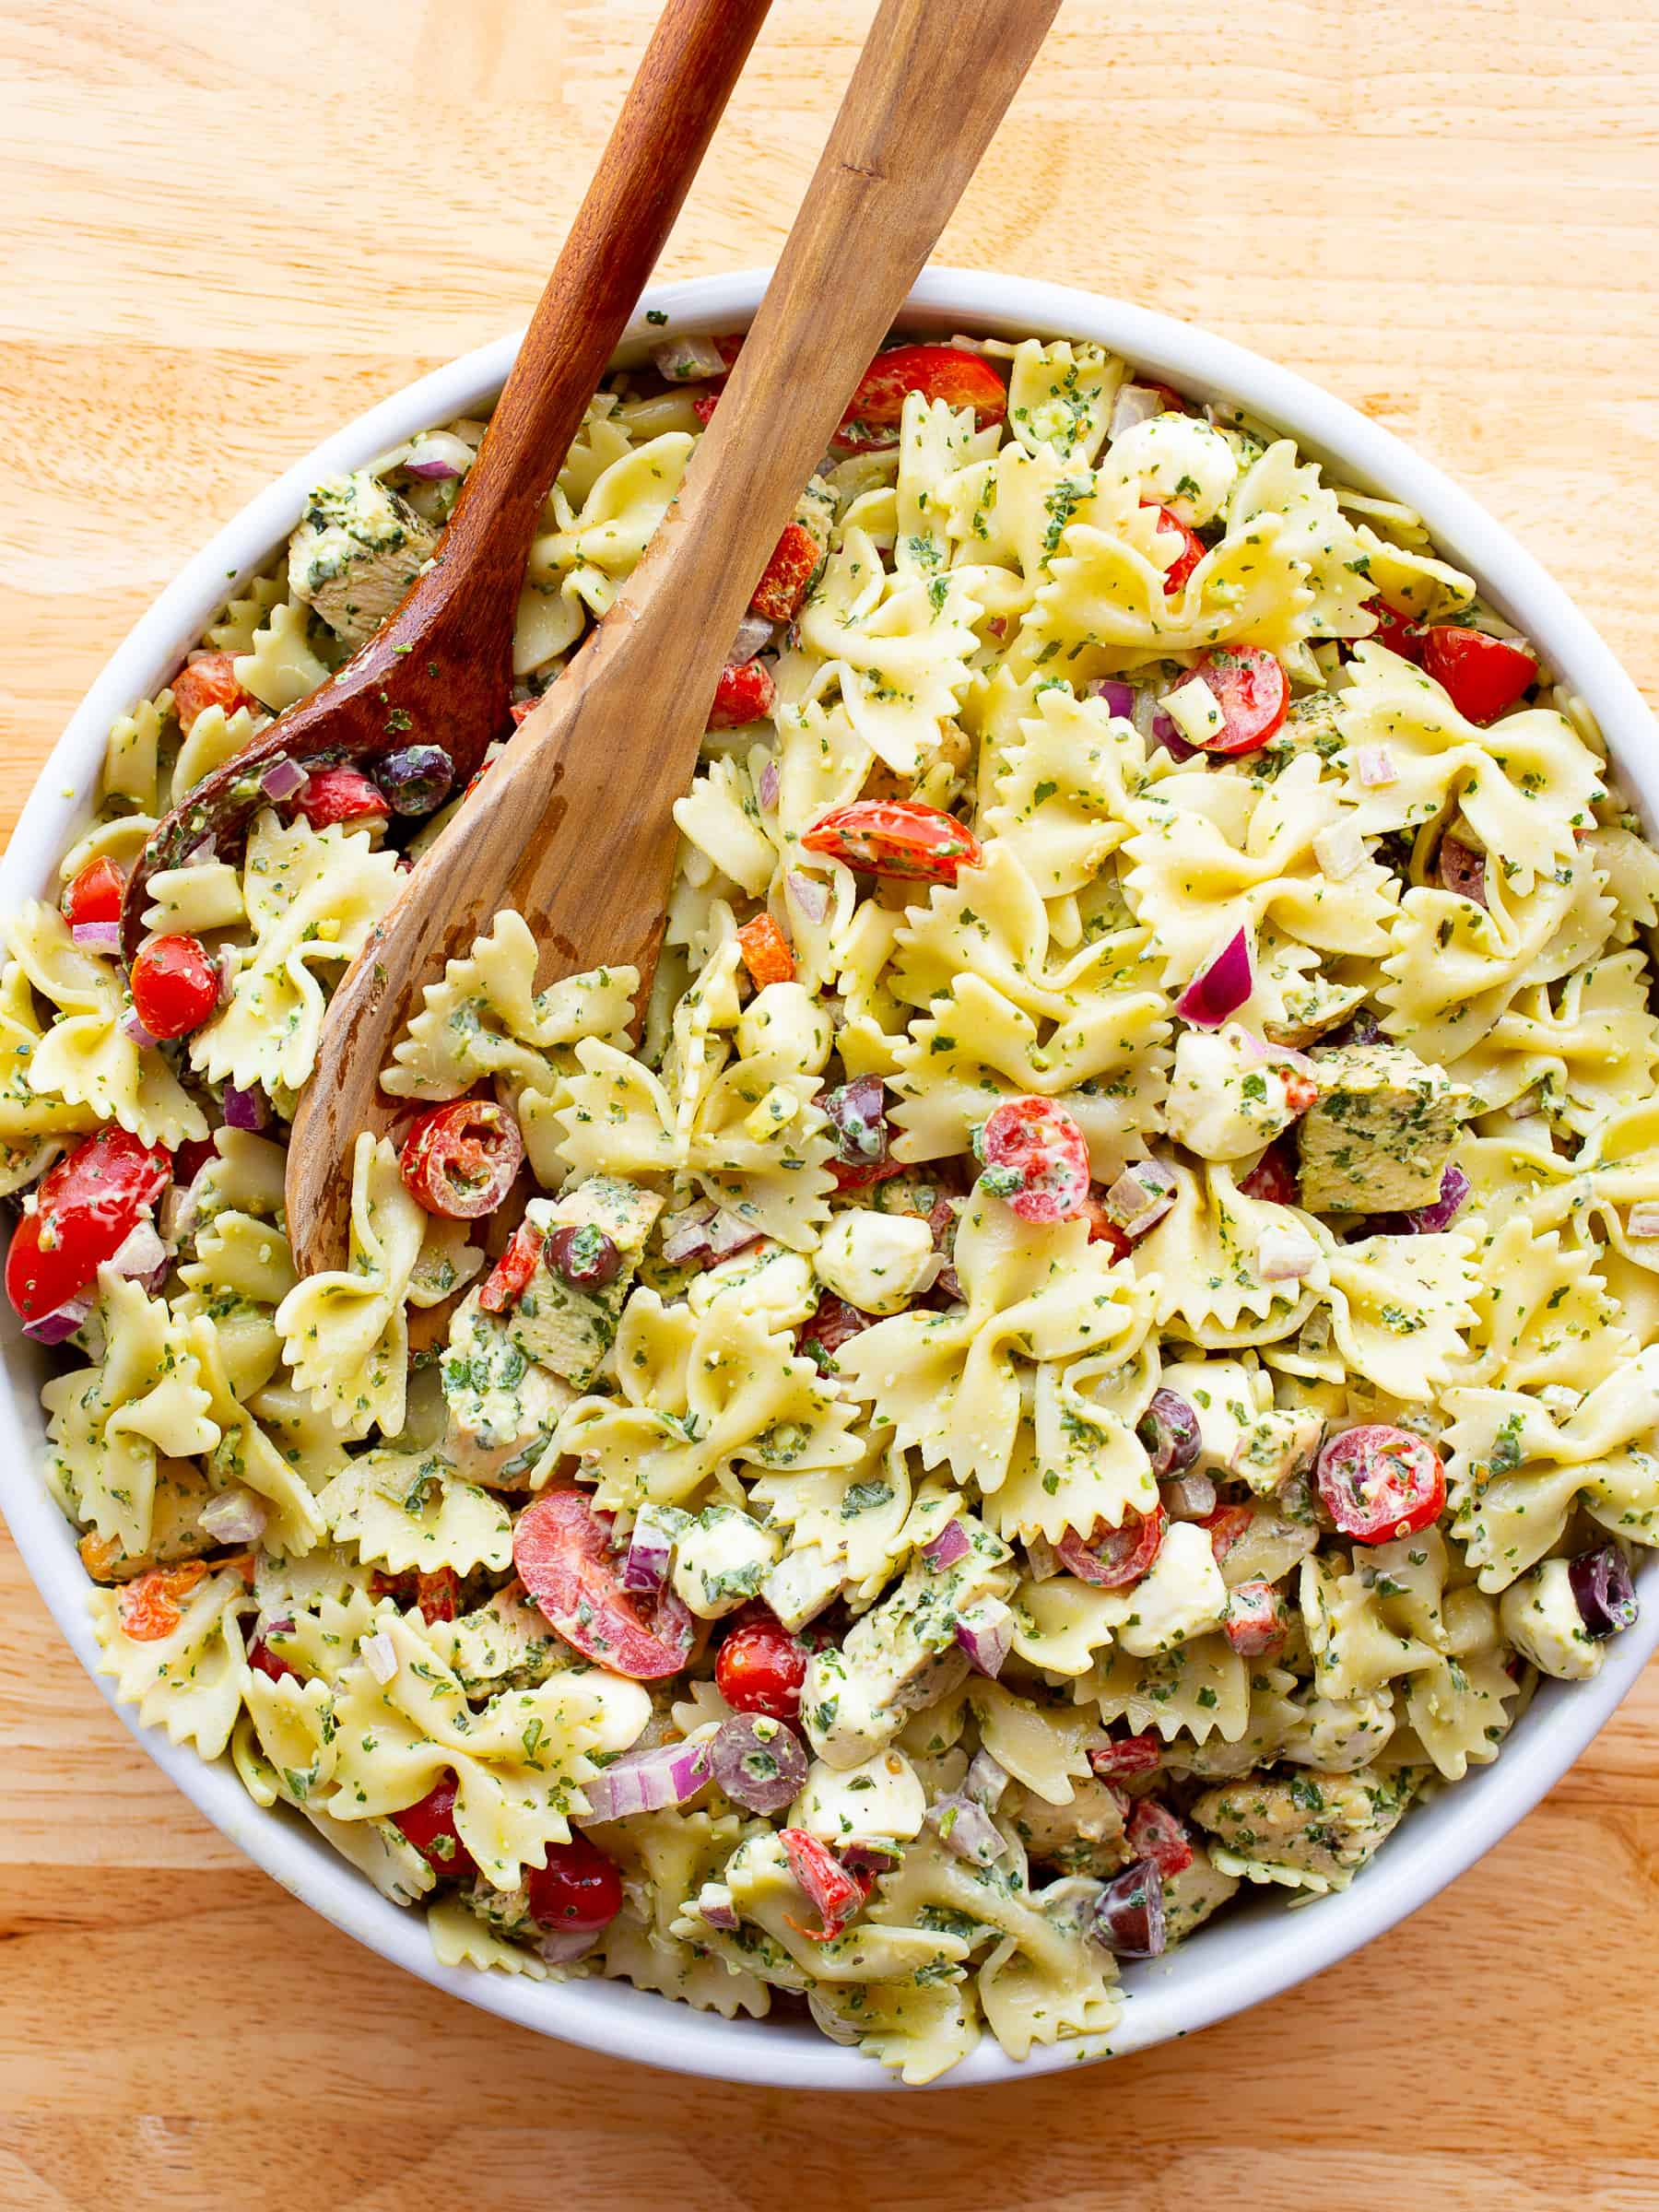 Bowl of basil pasta salad in a white bowl. Two wooden spoons are set in the left of the bowl.